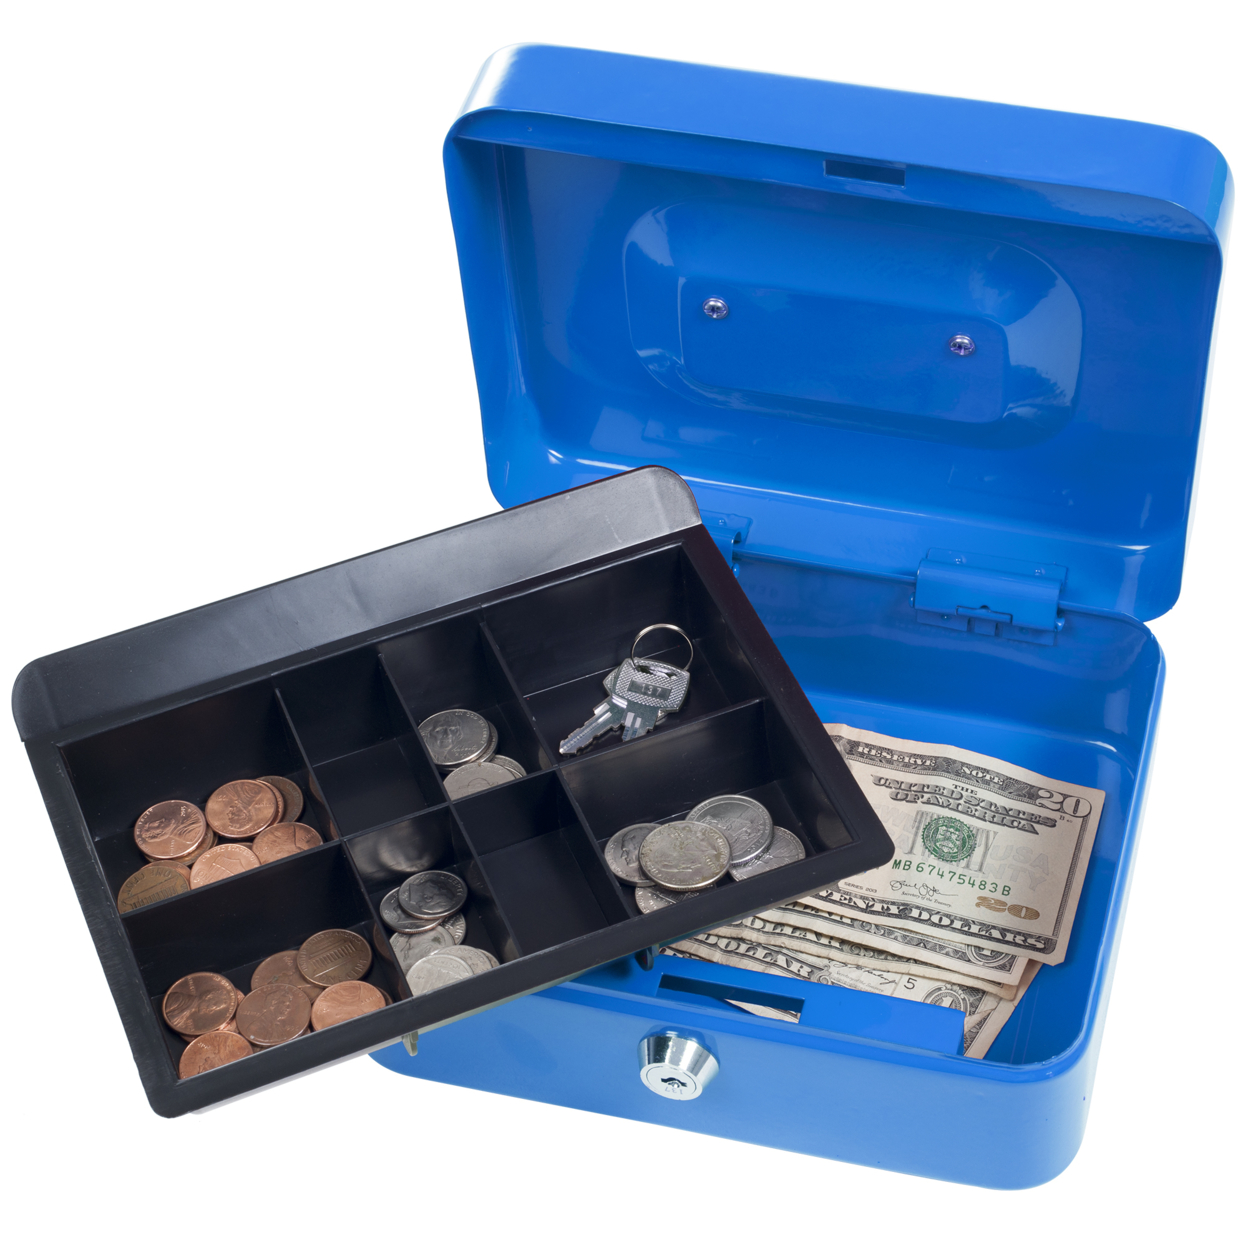 Stalwart 8 Inch Locking Cash Box With Coin Tray